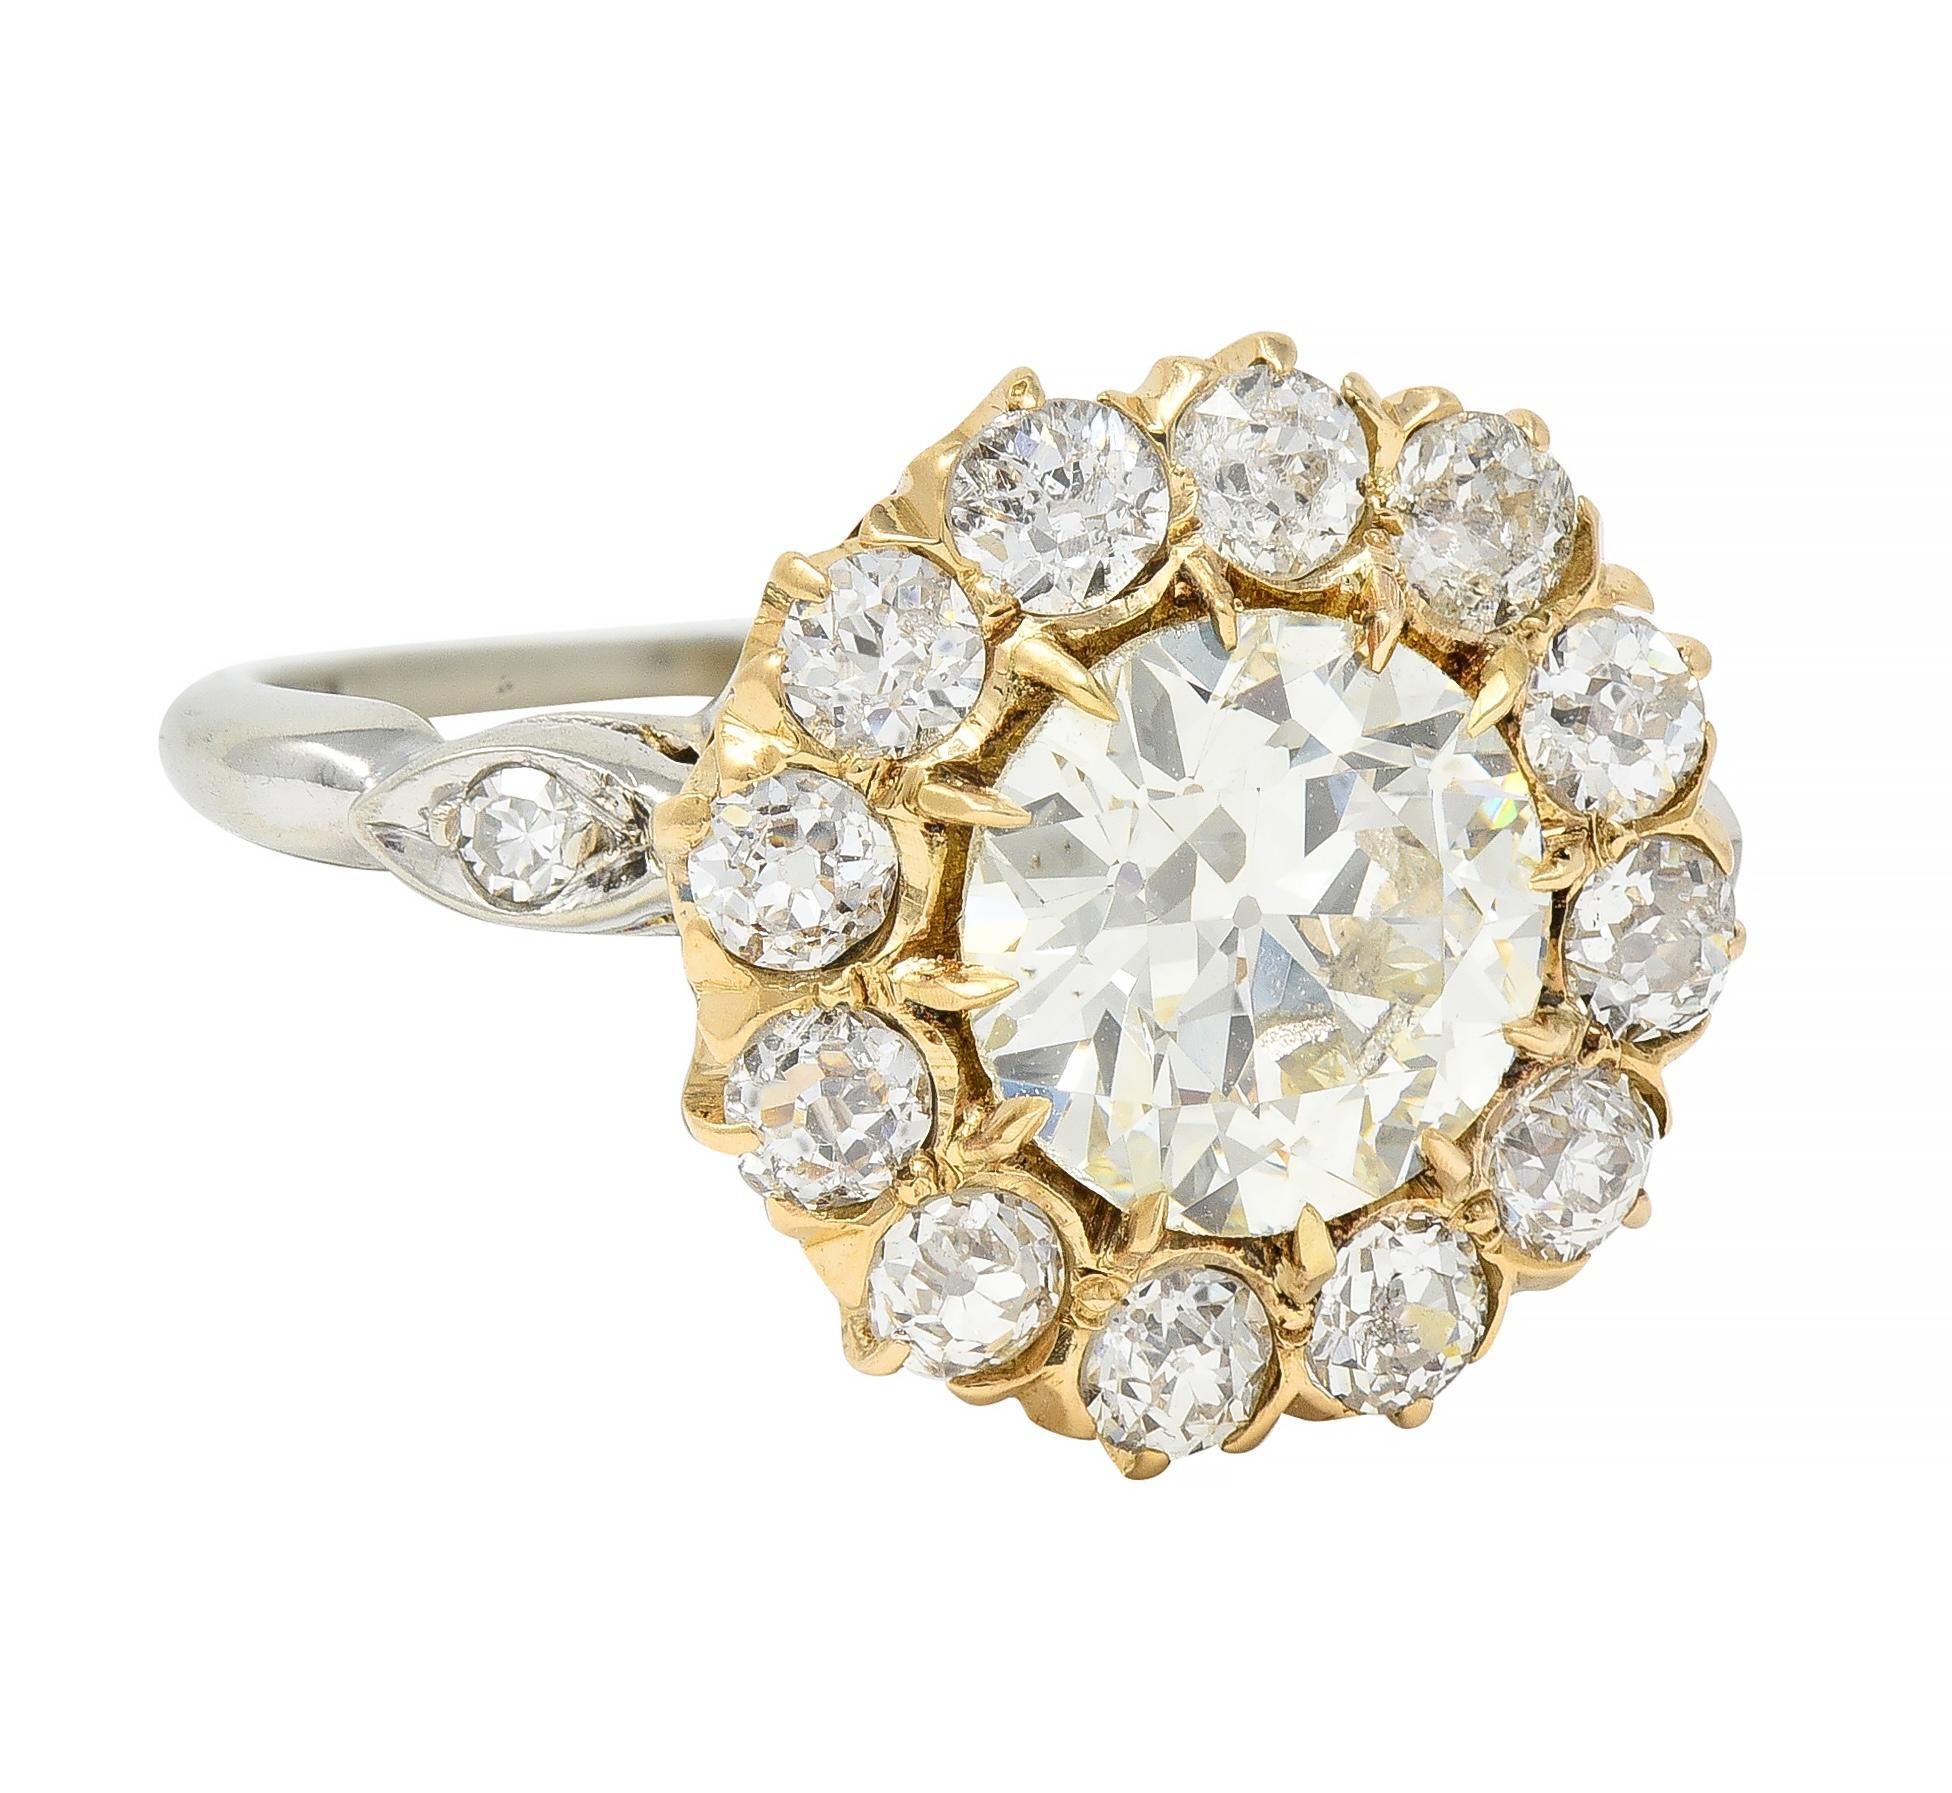 Centering an old European cut diamond weighing 1.95 carats - N color with VS2 clarity
Set with talon prongs in yellow gold gallery with halo surround
Comprised of additional old European cut diamonds 
Weighing approximately 0.96 carat total 
I to K